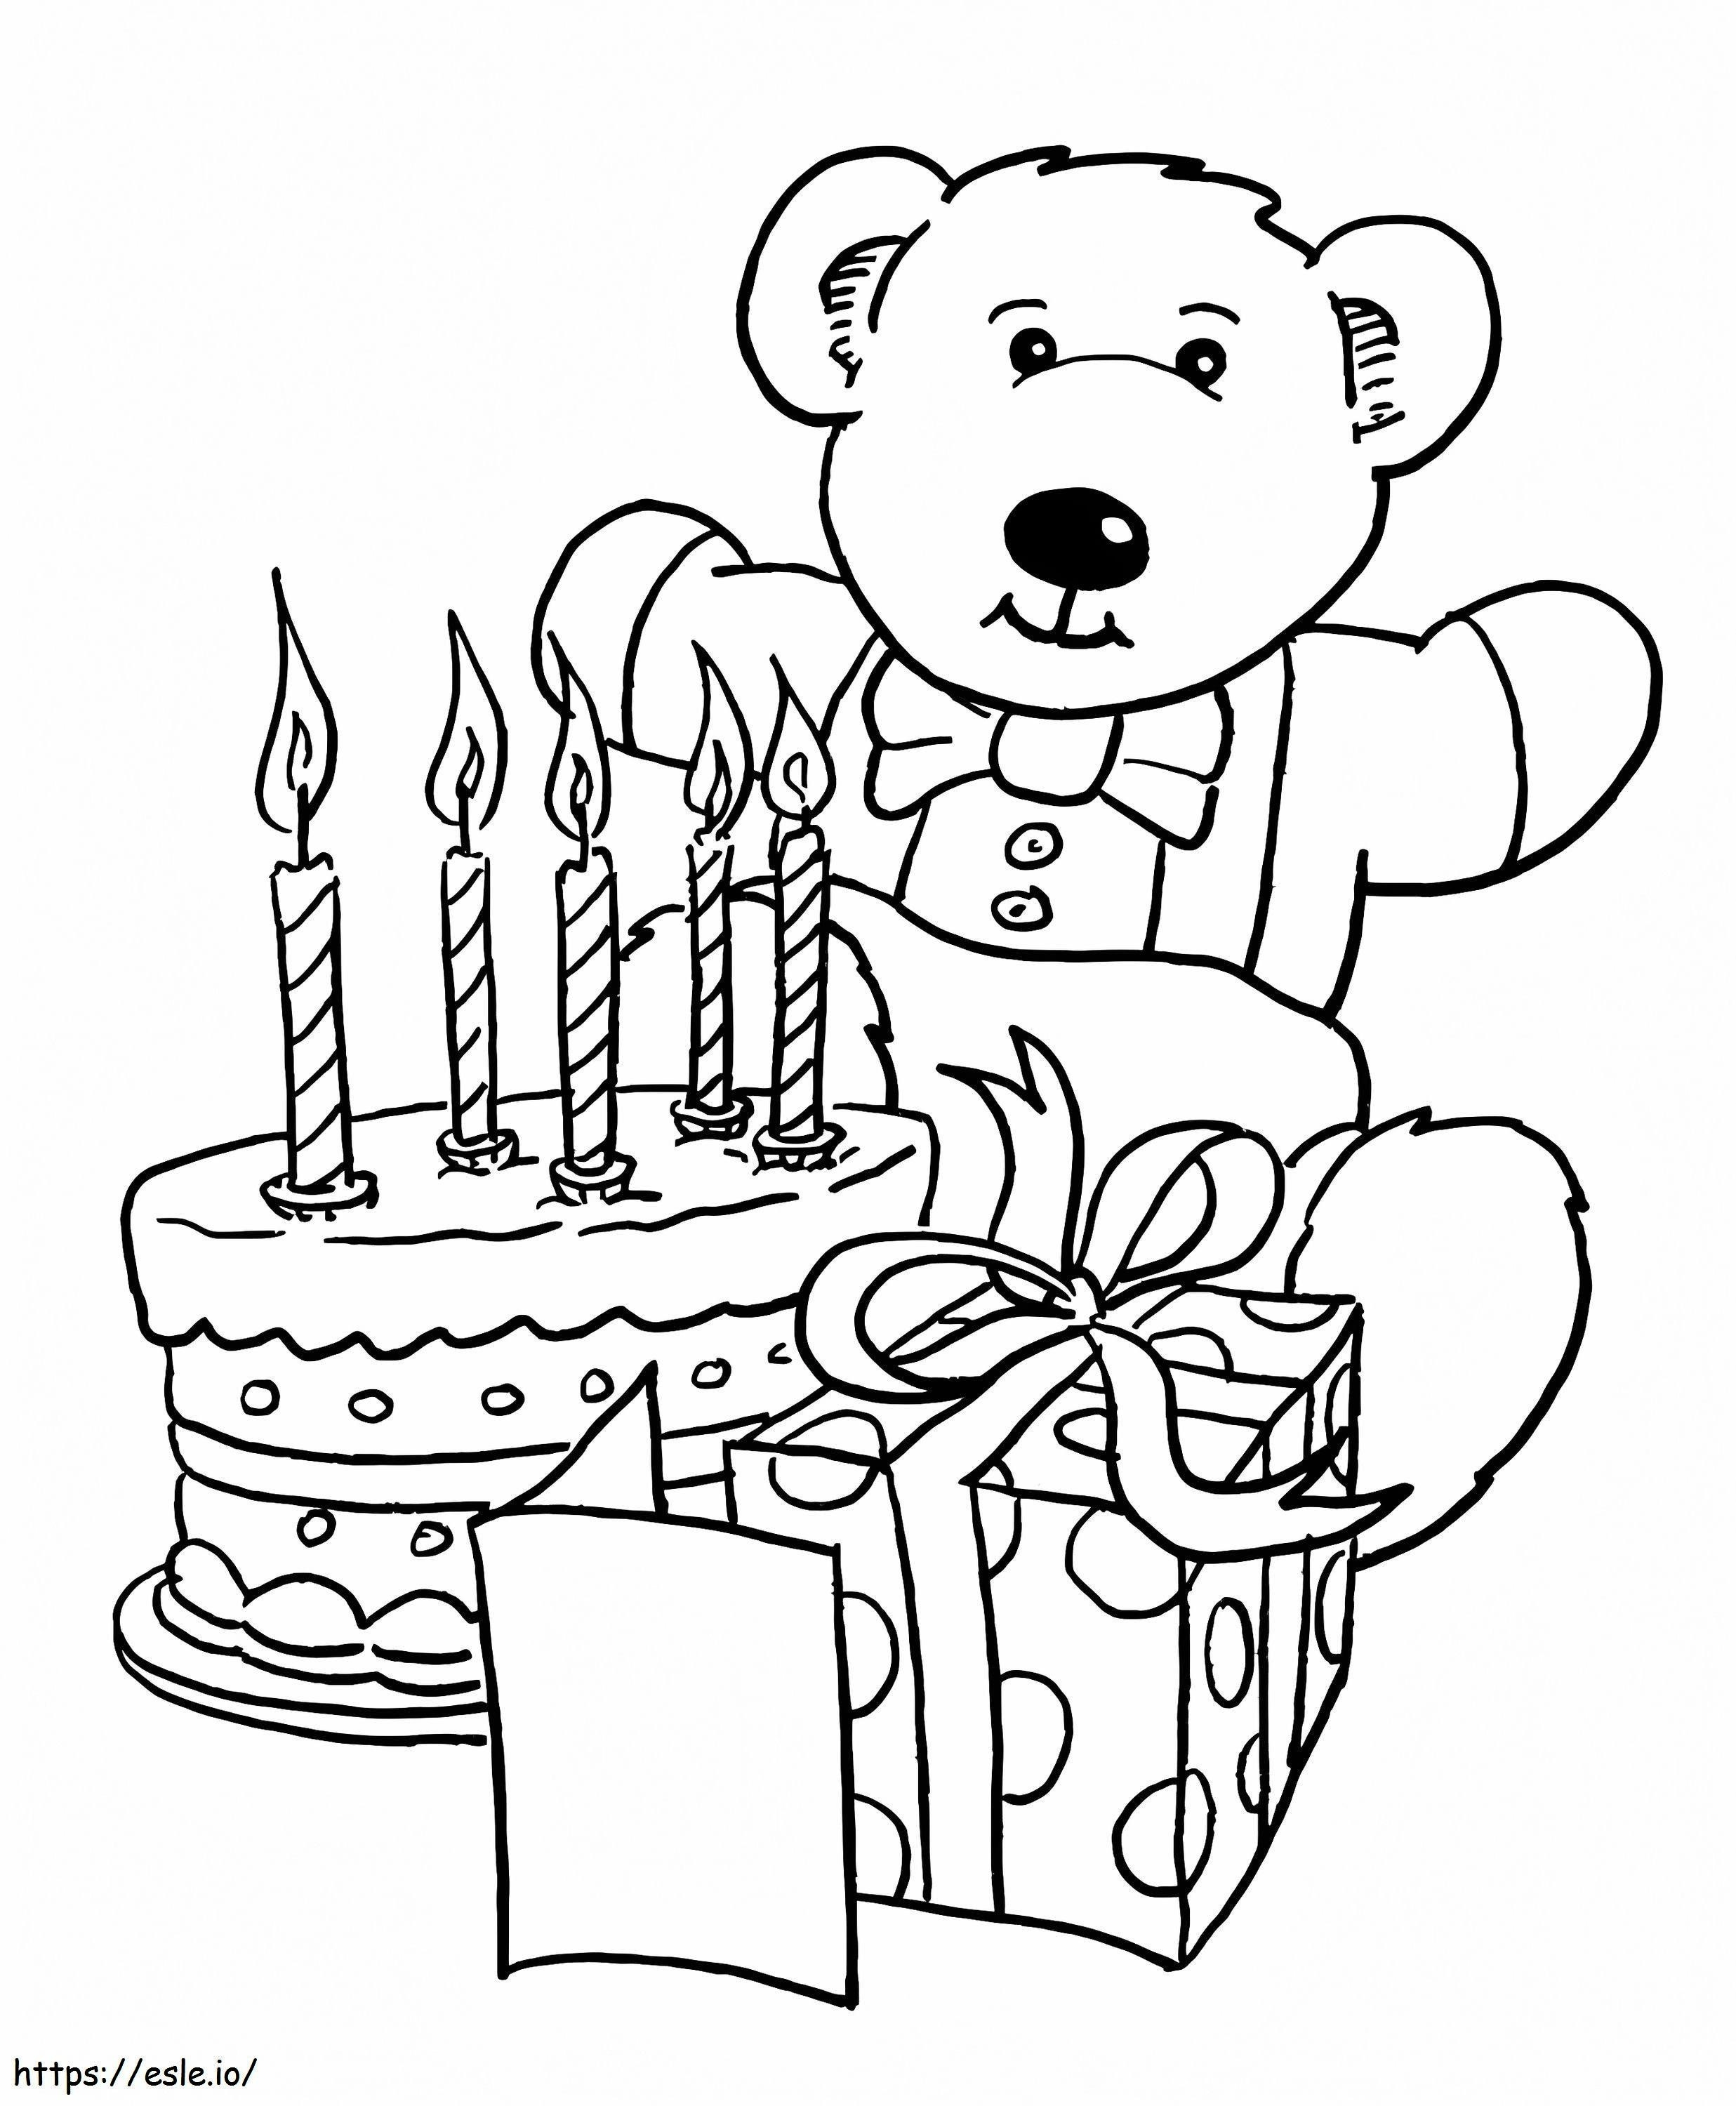 Toy And Birthday Cake coloring page